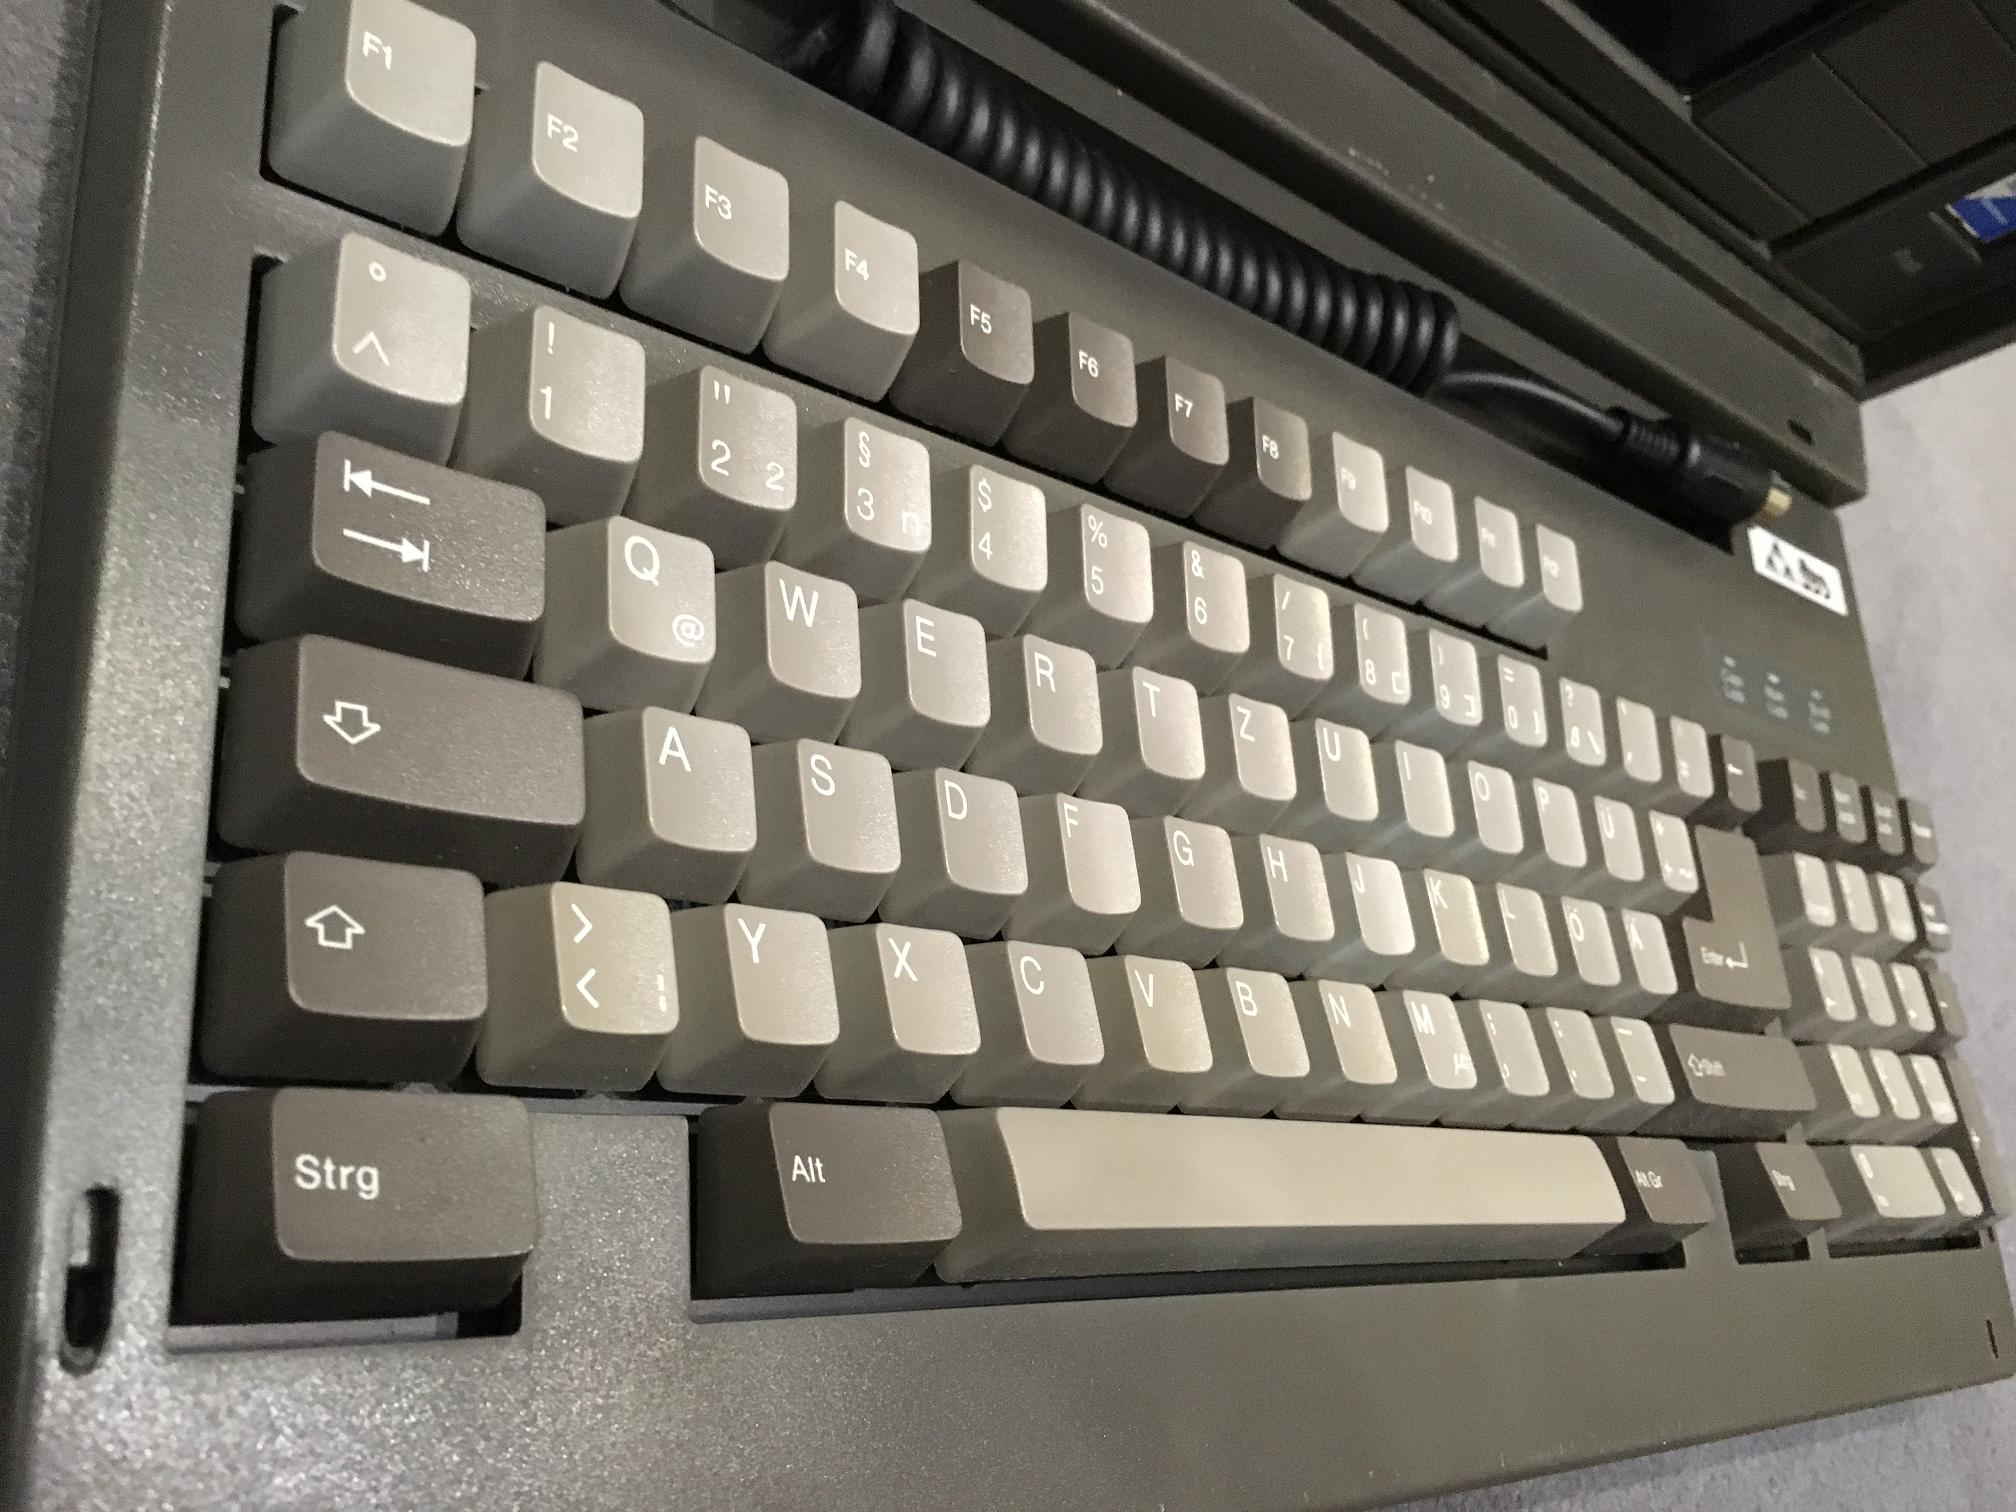 Don't think this keyboard has seen much action